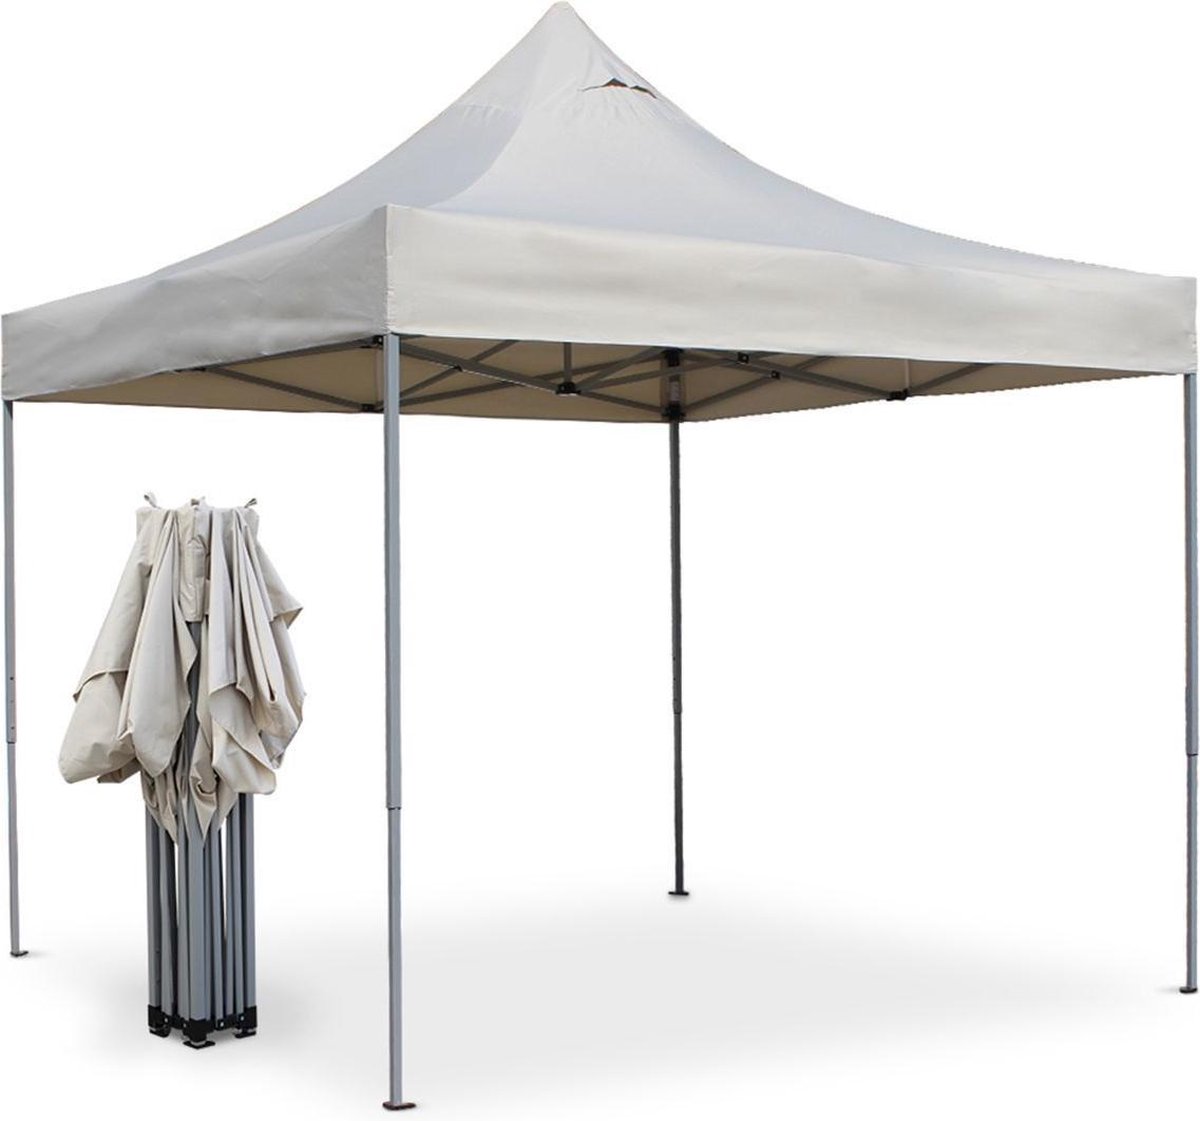 sweeek - Opvouwbare partytent 3x3m - tecto